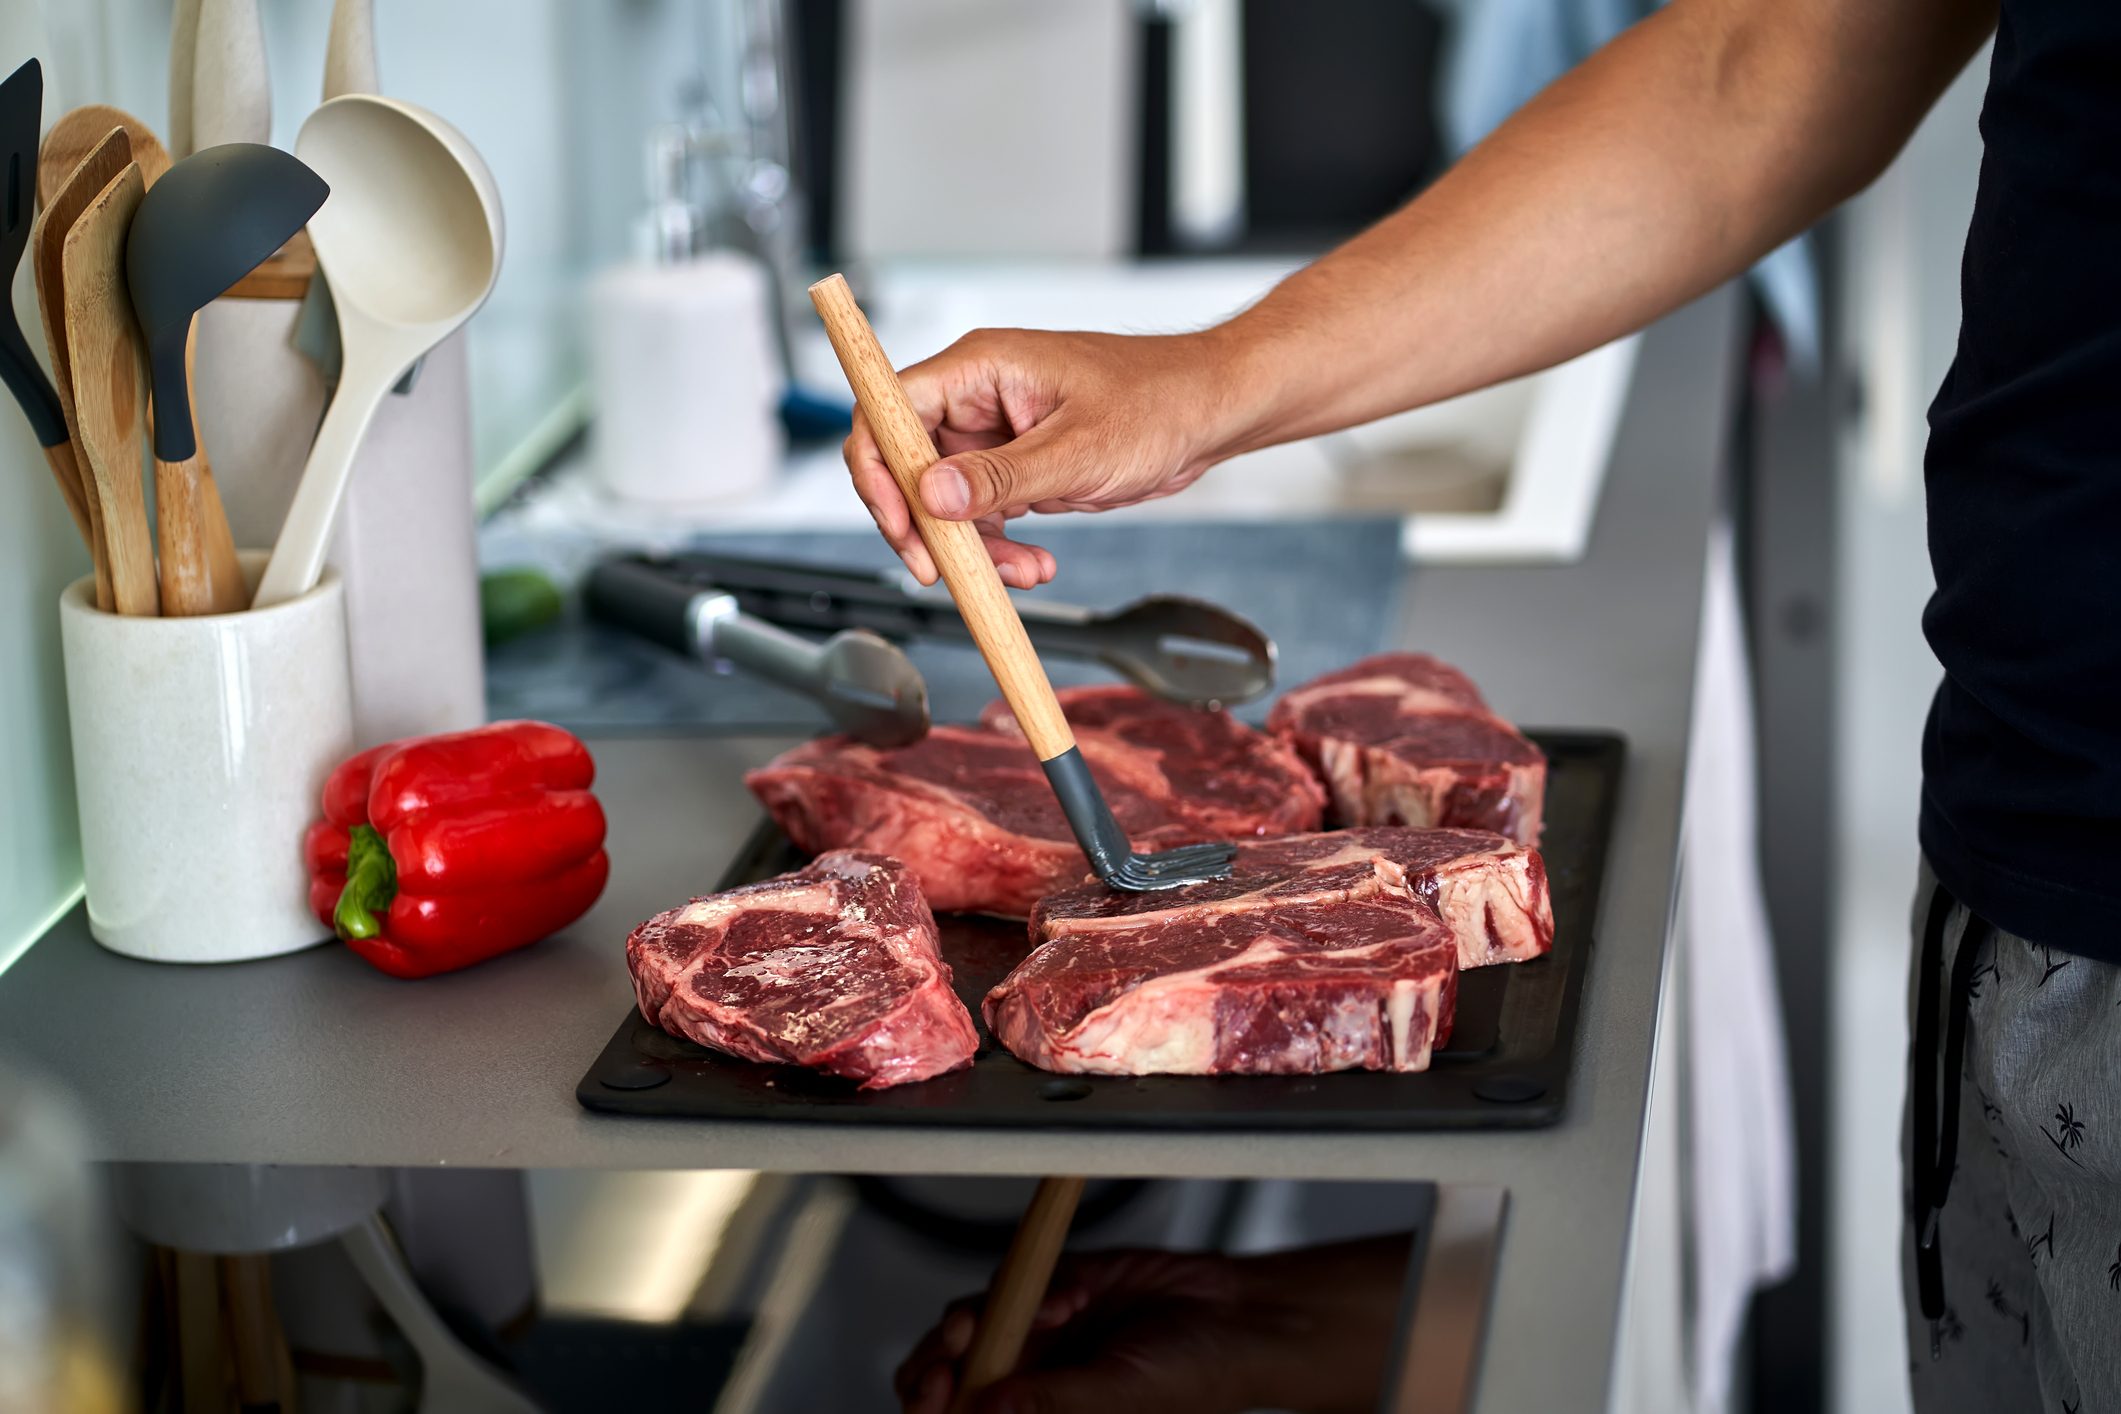 Men's hands lubricate meat steaks with oil before cooking.